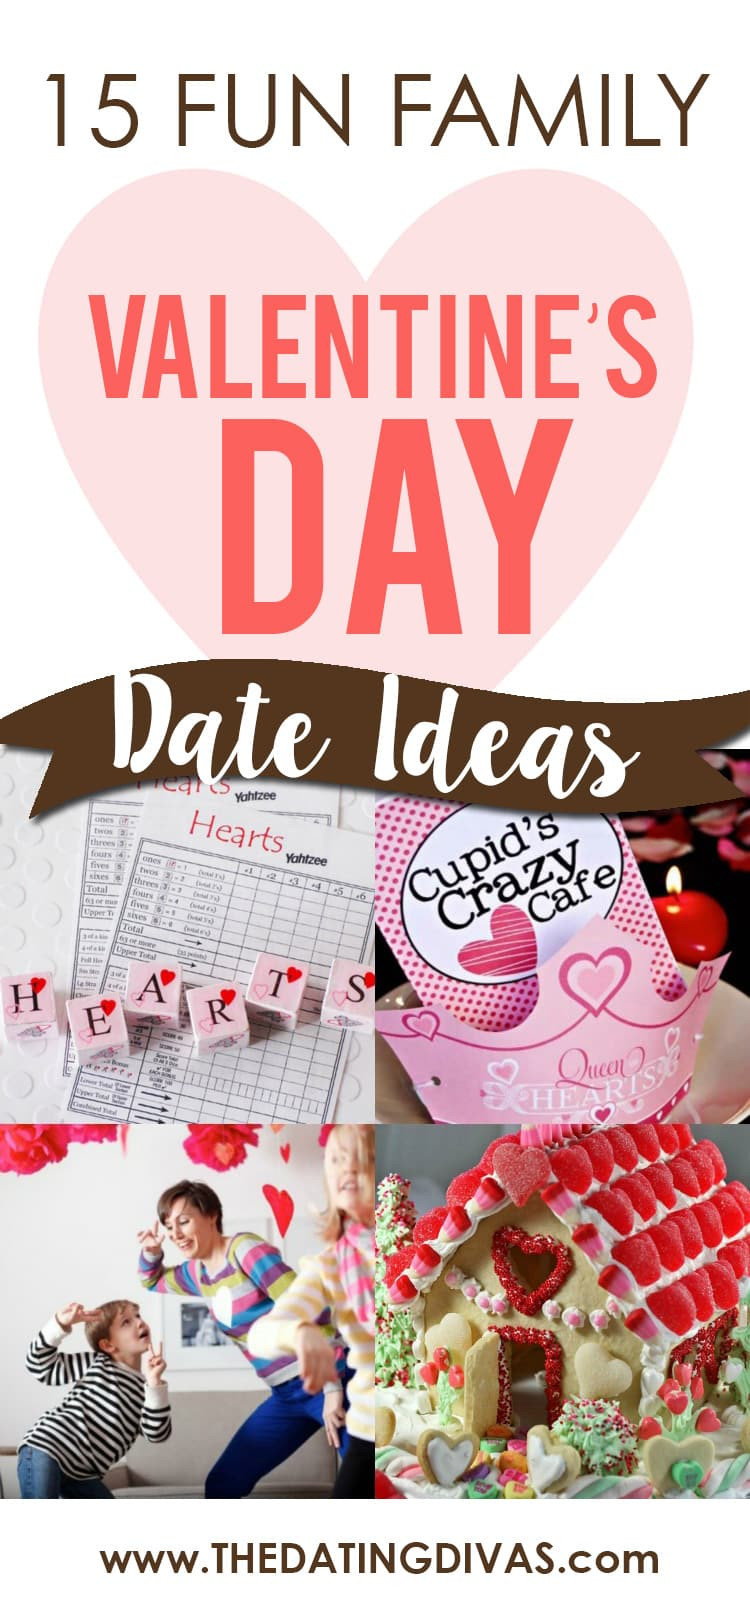 Valentines Day Date Ideas
 The Top 76 Valentine s Day Date Ideas The Dating Divas